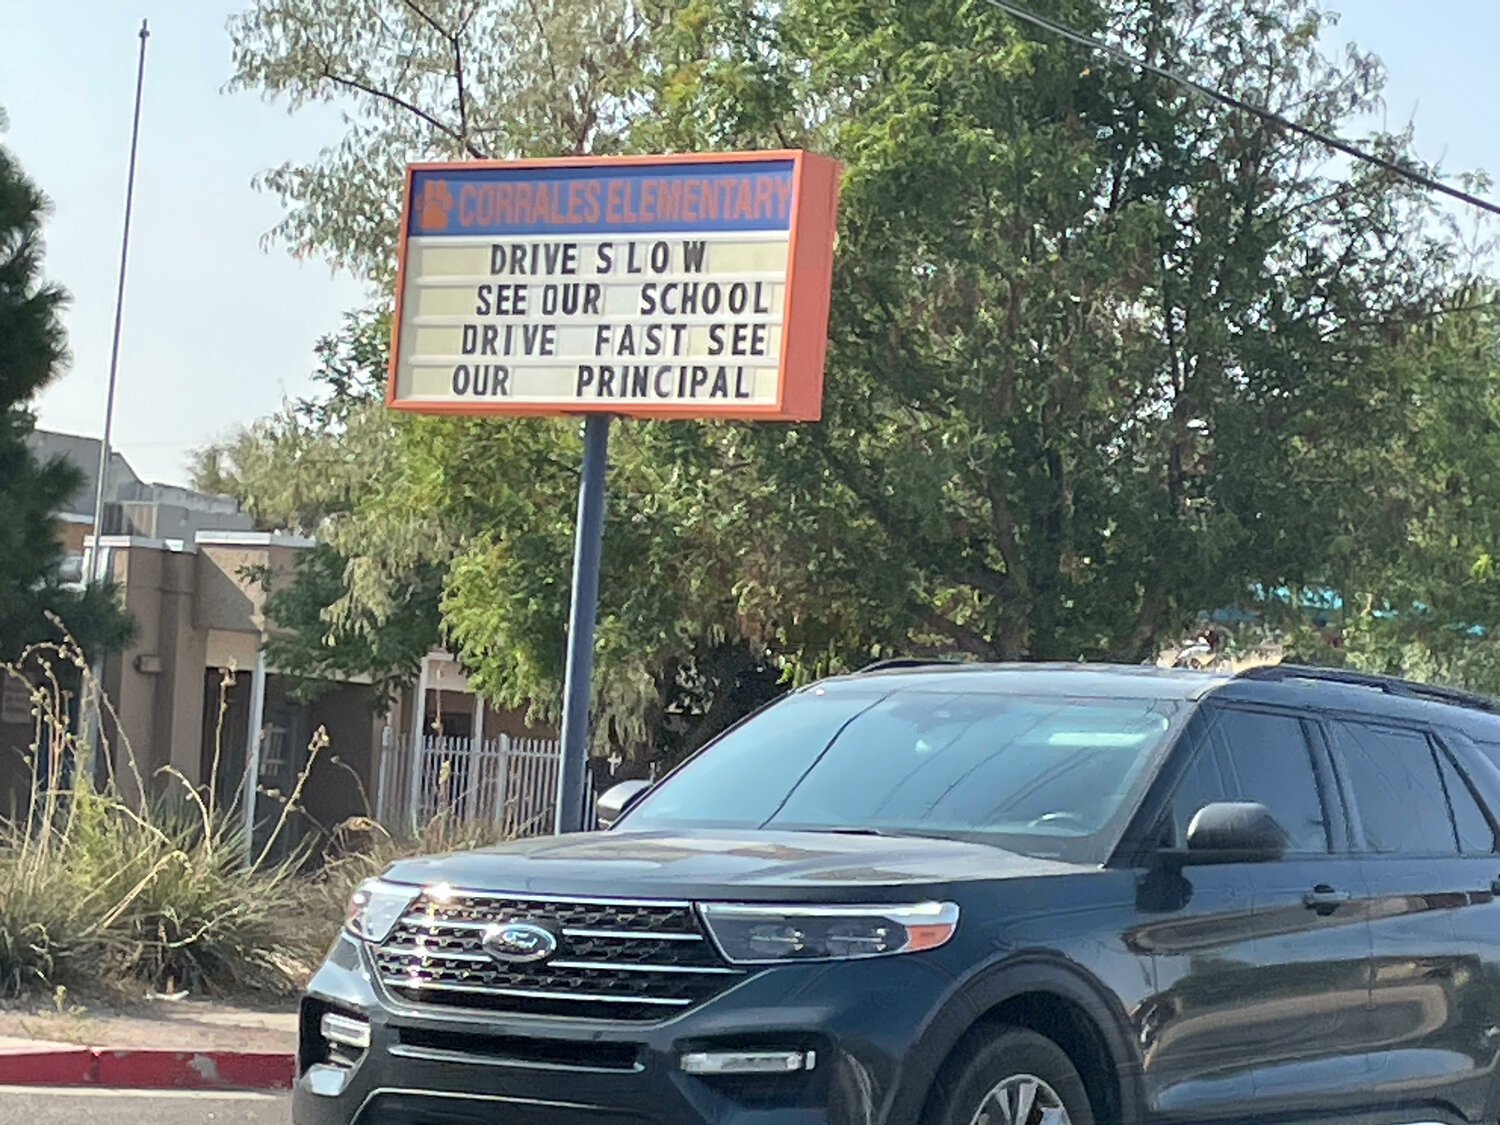 Borrowing from a sign that used to appear in the village, Corrales Elementary School urges motorists to drive at safe speeds.